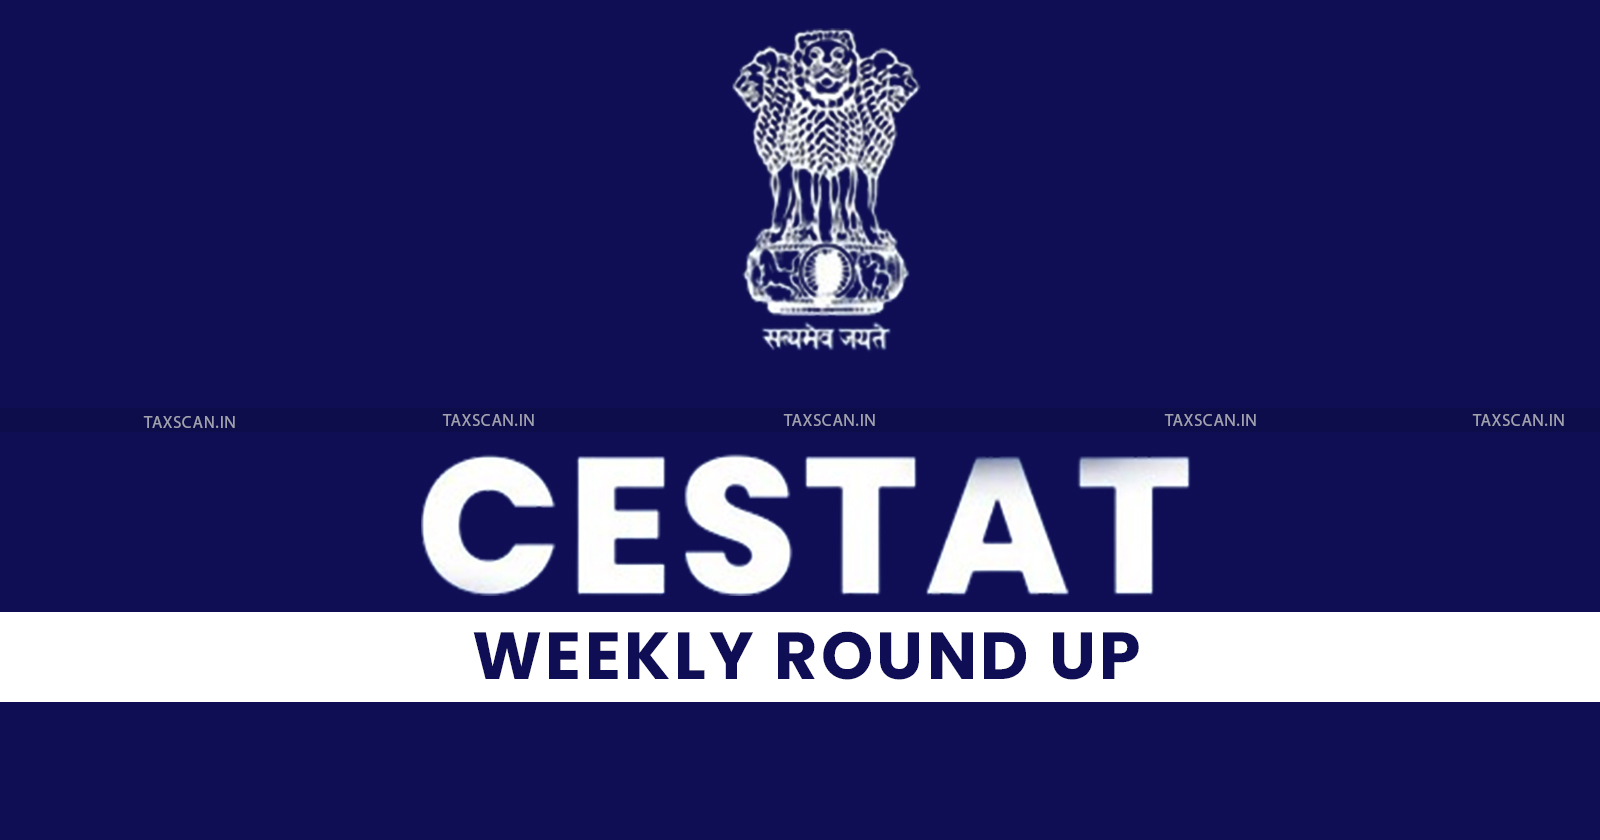 CESTAT Weekly Round Up - taxscan